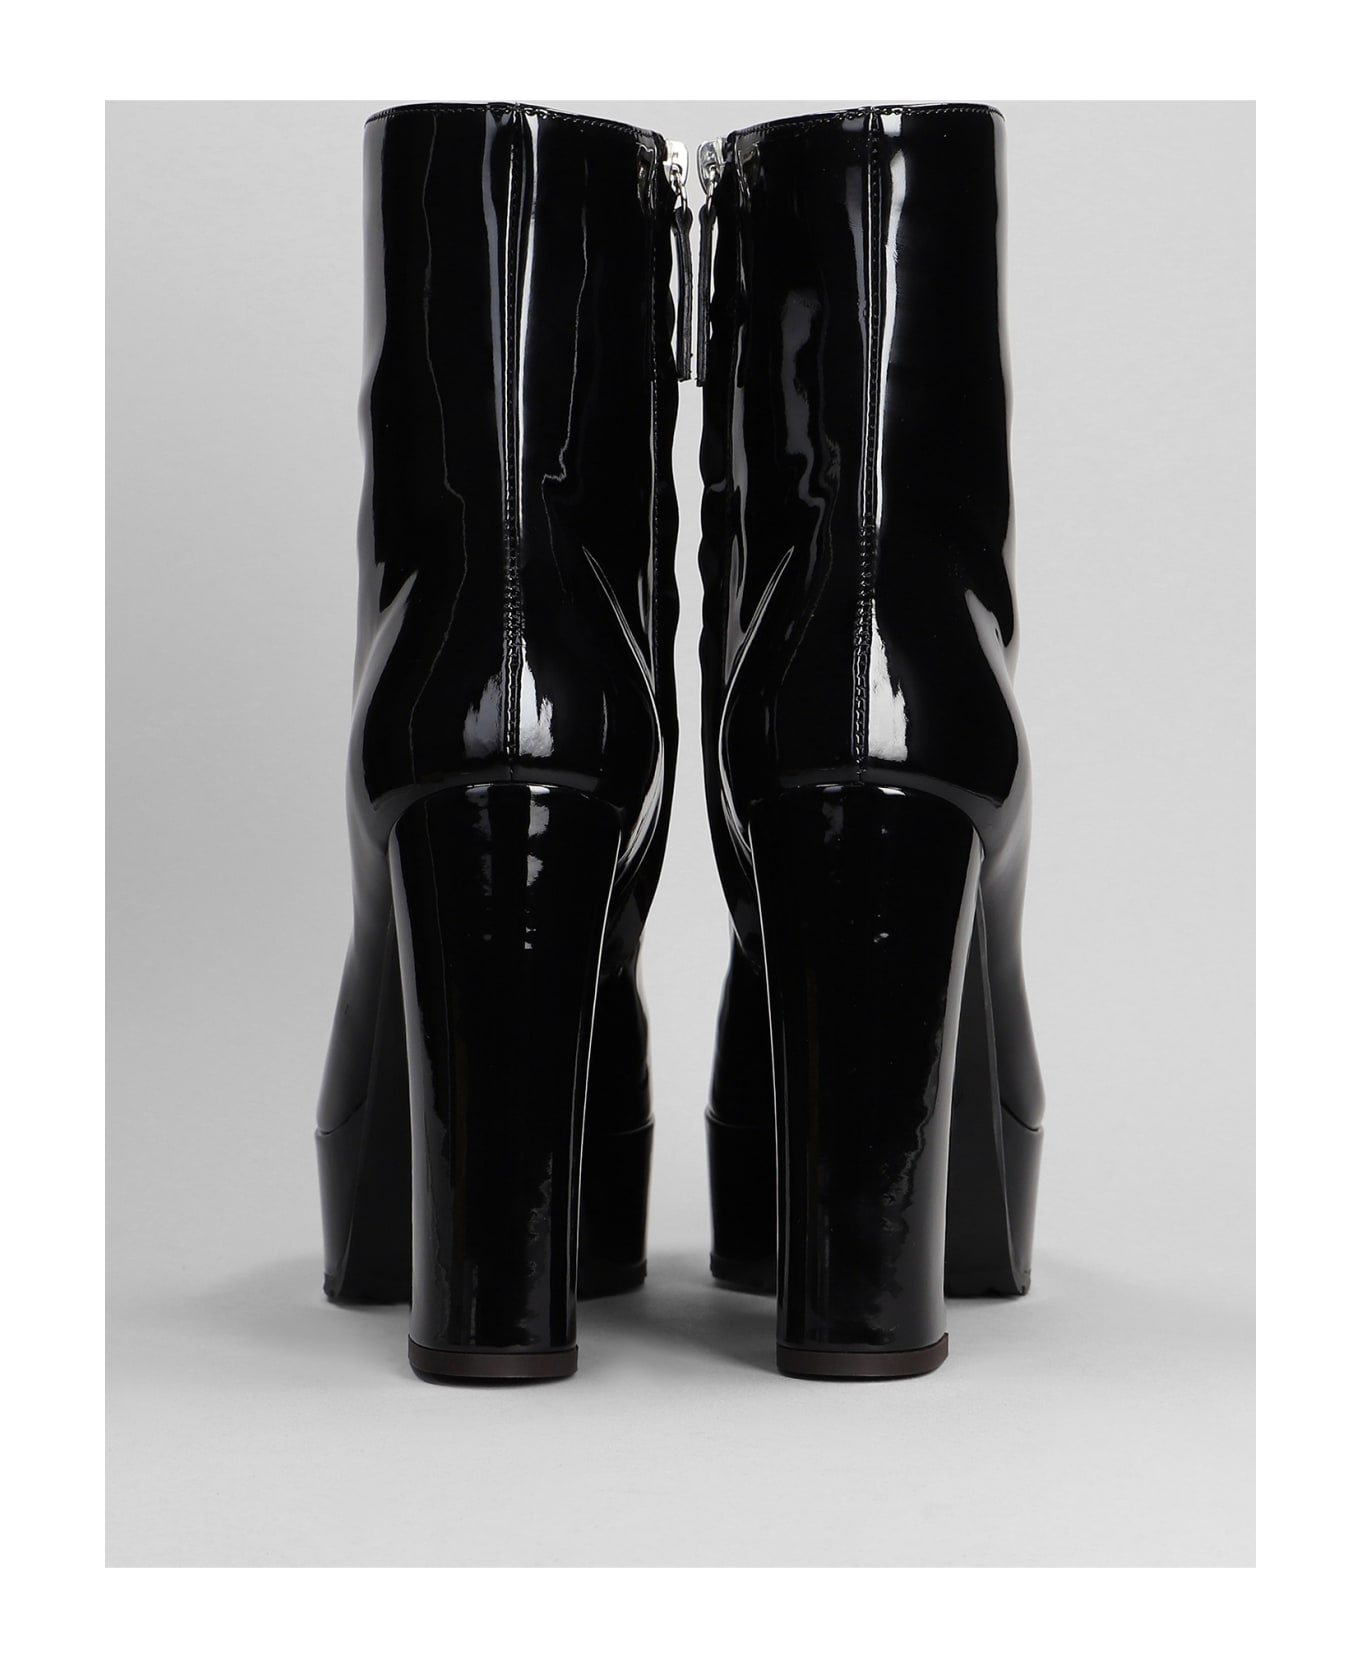 Giuseppe Zanotti Morgana High Heels Ankle Boots In Black Patent Leather - black ブーツ